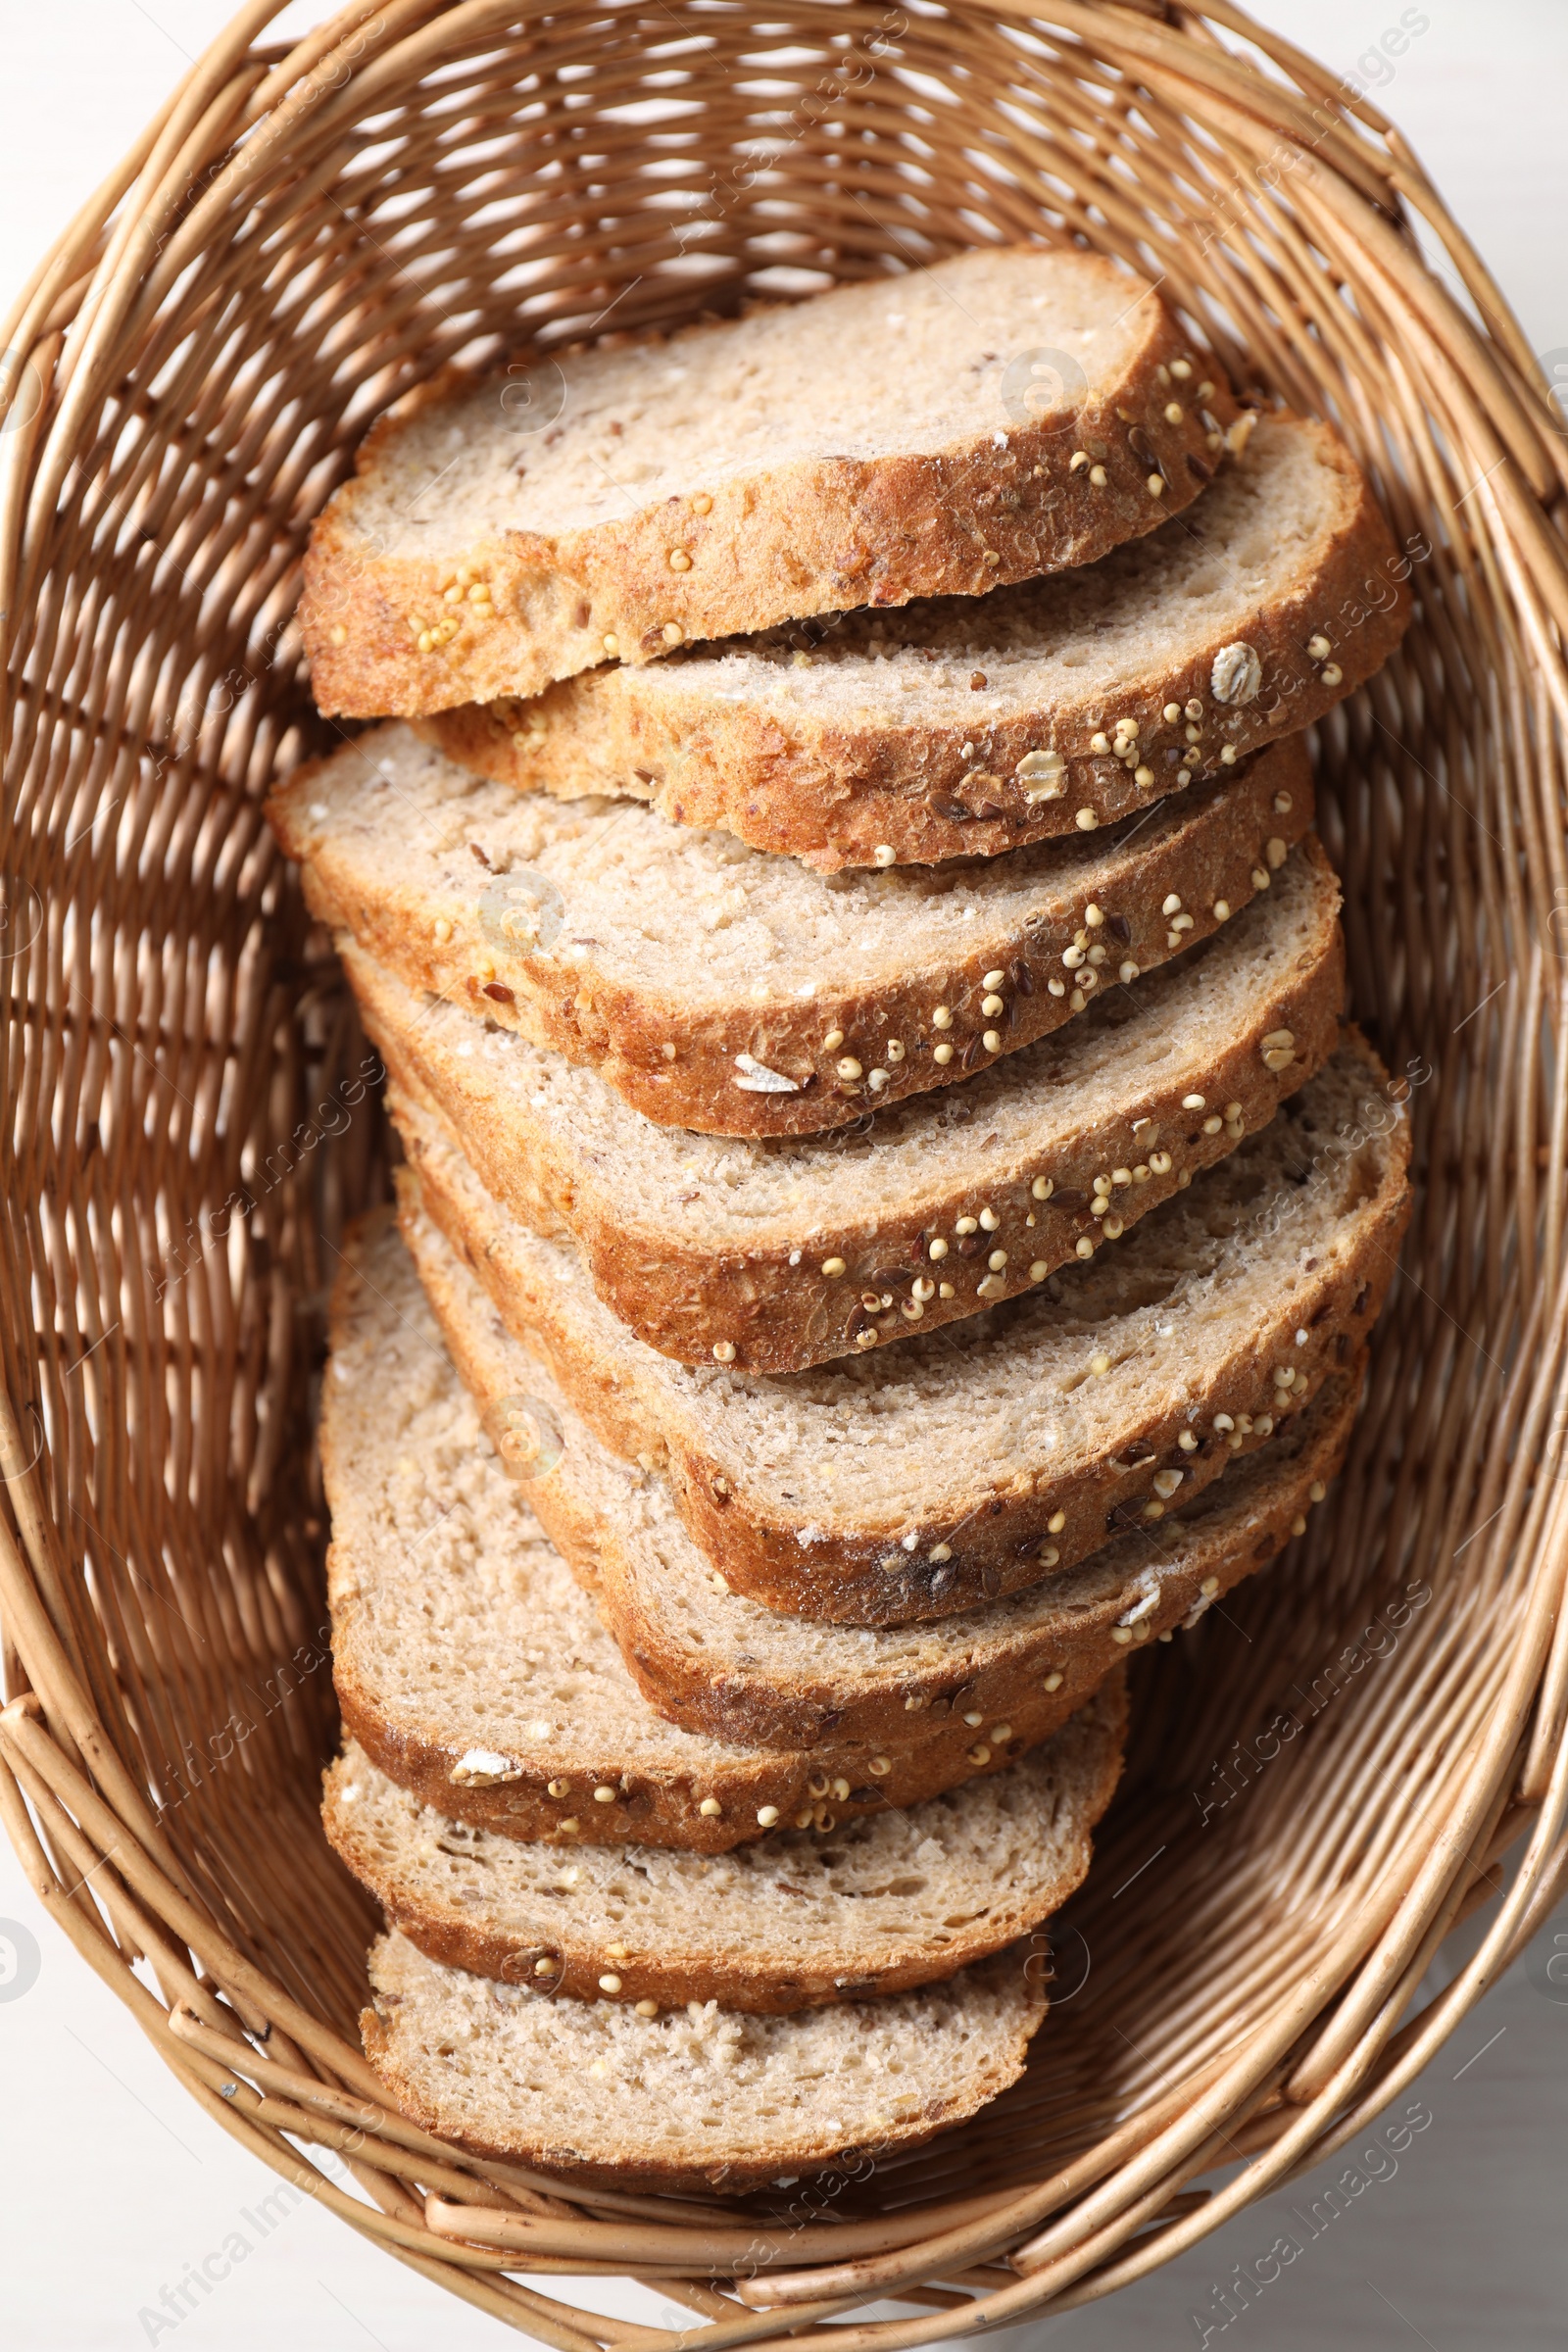 Photo of Slices of fresh homemade bread in wicker basket on white wooden table, top view